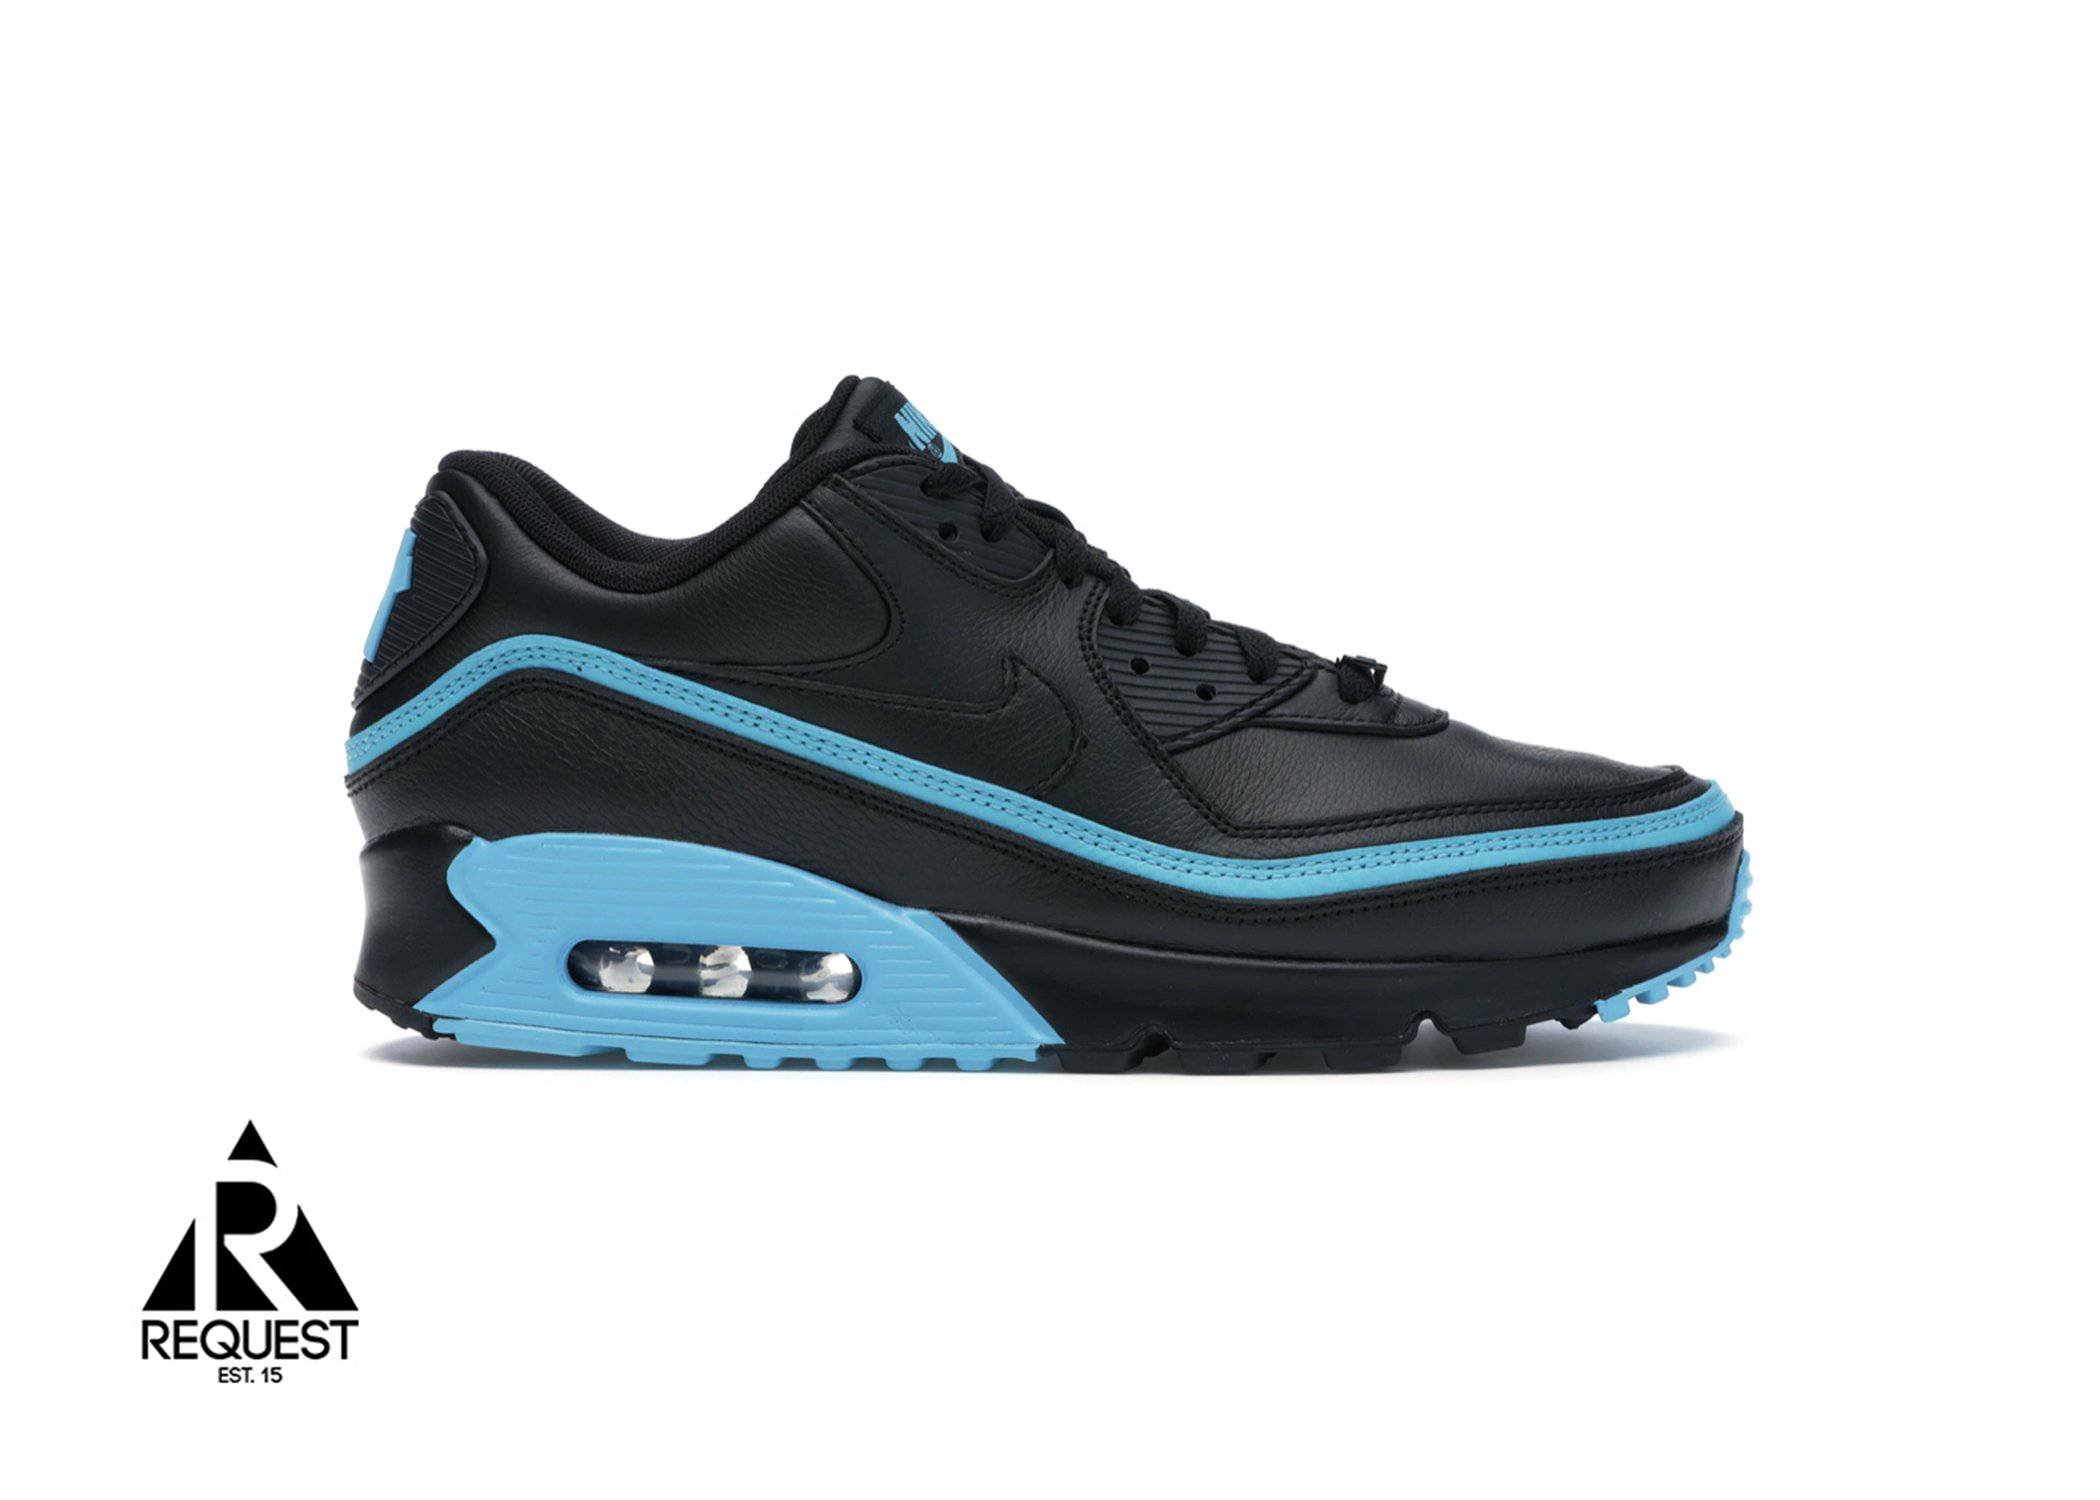 Air Max 90 “Undefeated Black Blue Fury”